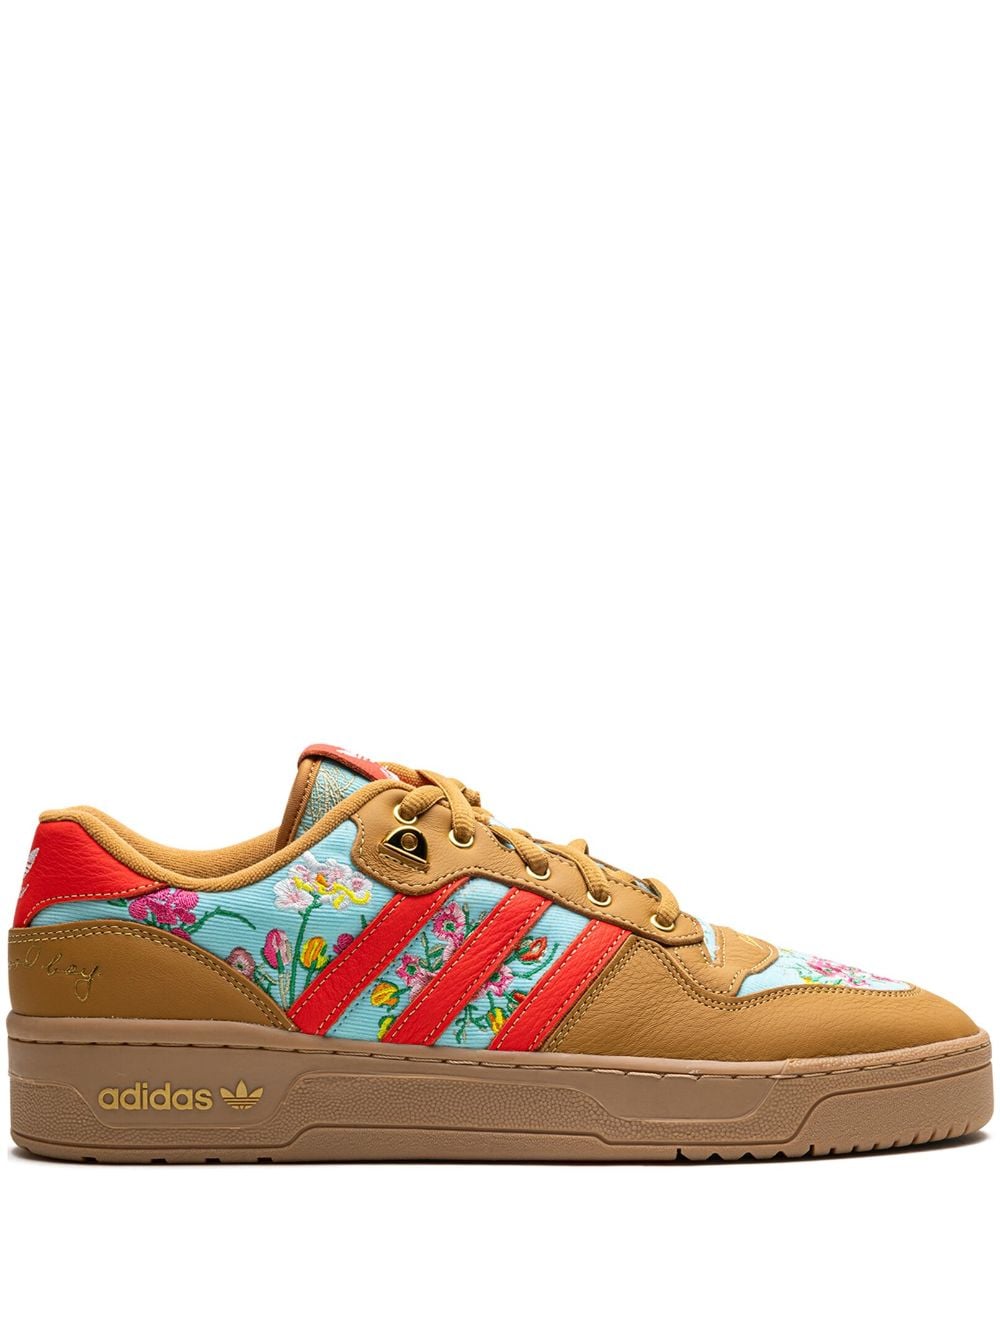 adidas x Unheardof Rivalry Low "Mom's Ugly Couch Special Box" sneakers - Brown von adidas